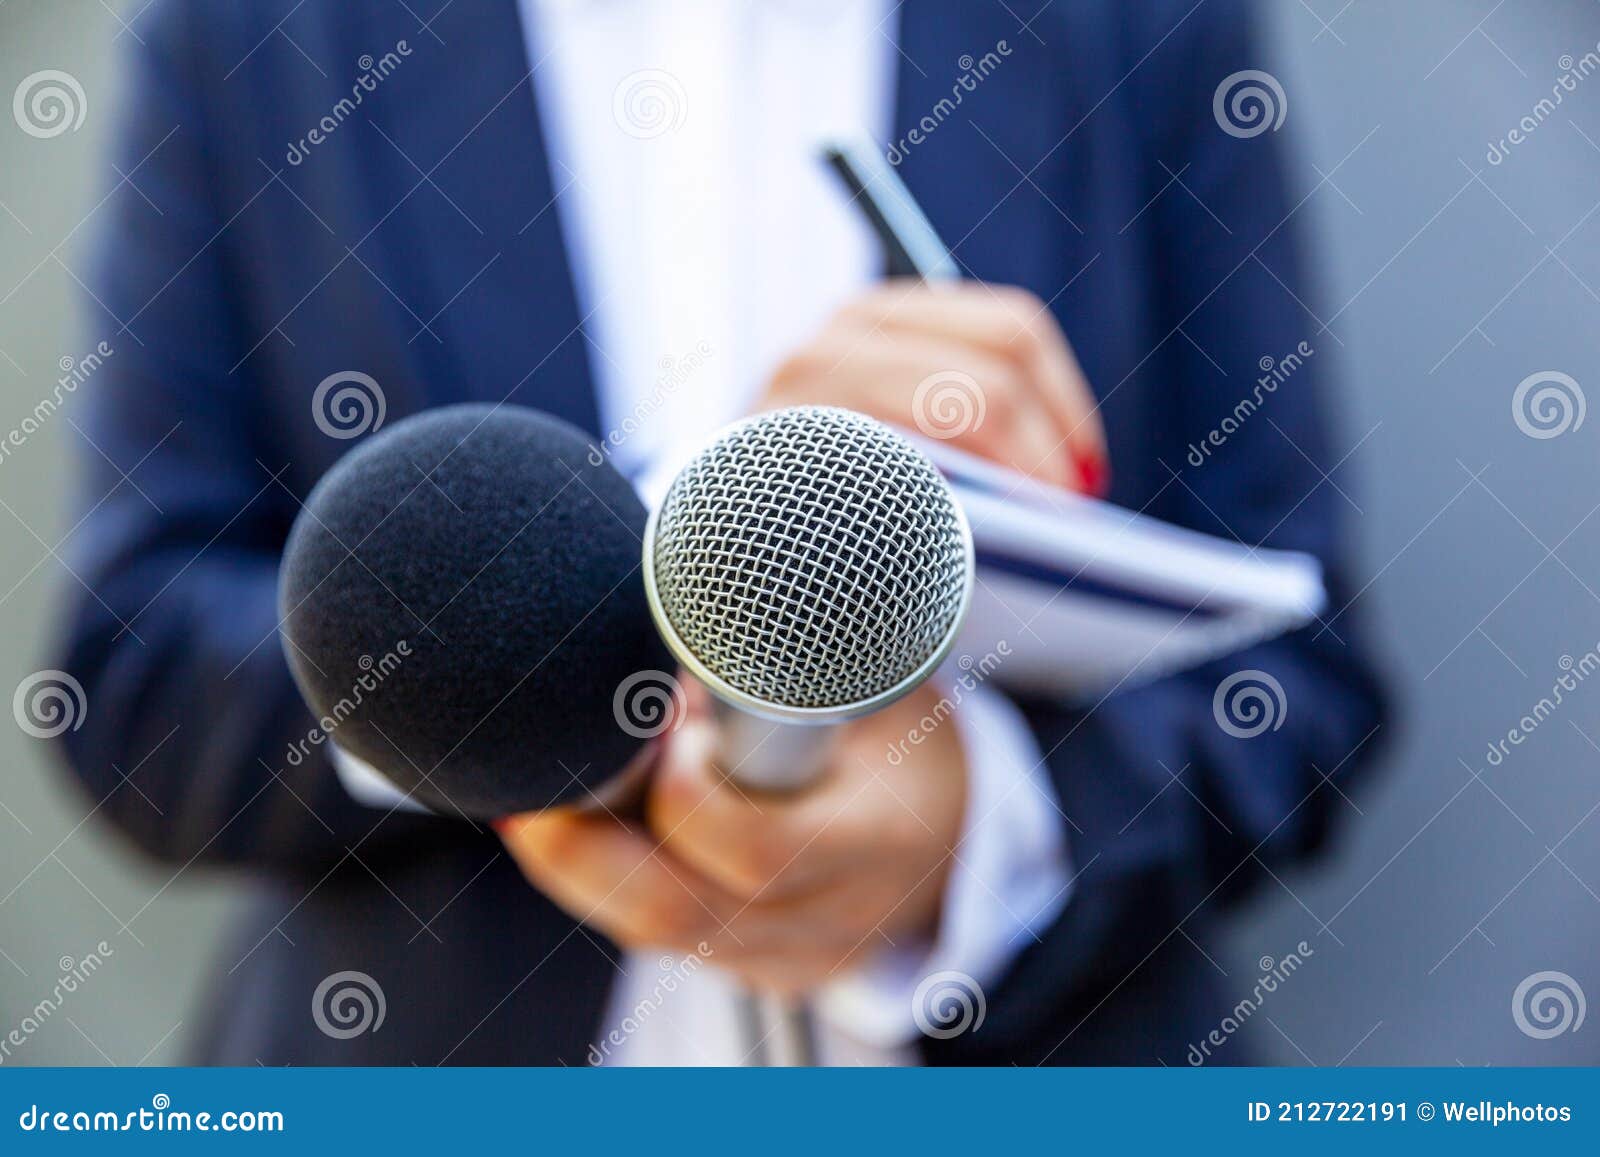 female journalist at news conference or media event, writing notes, holding microphone